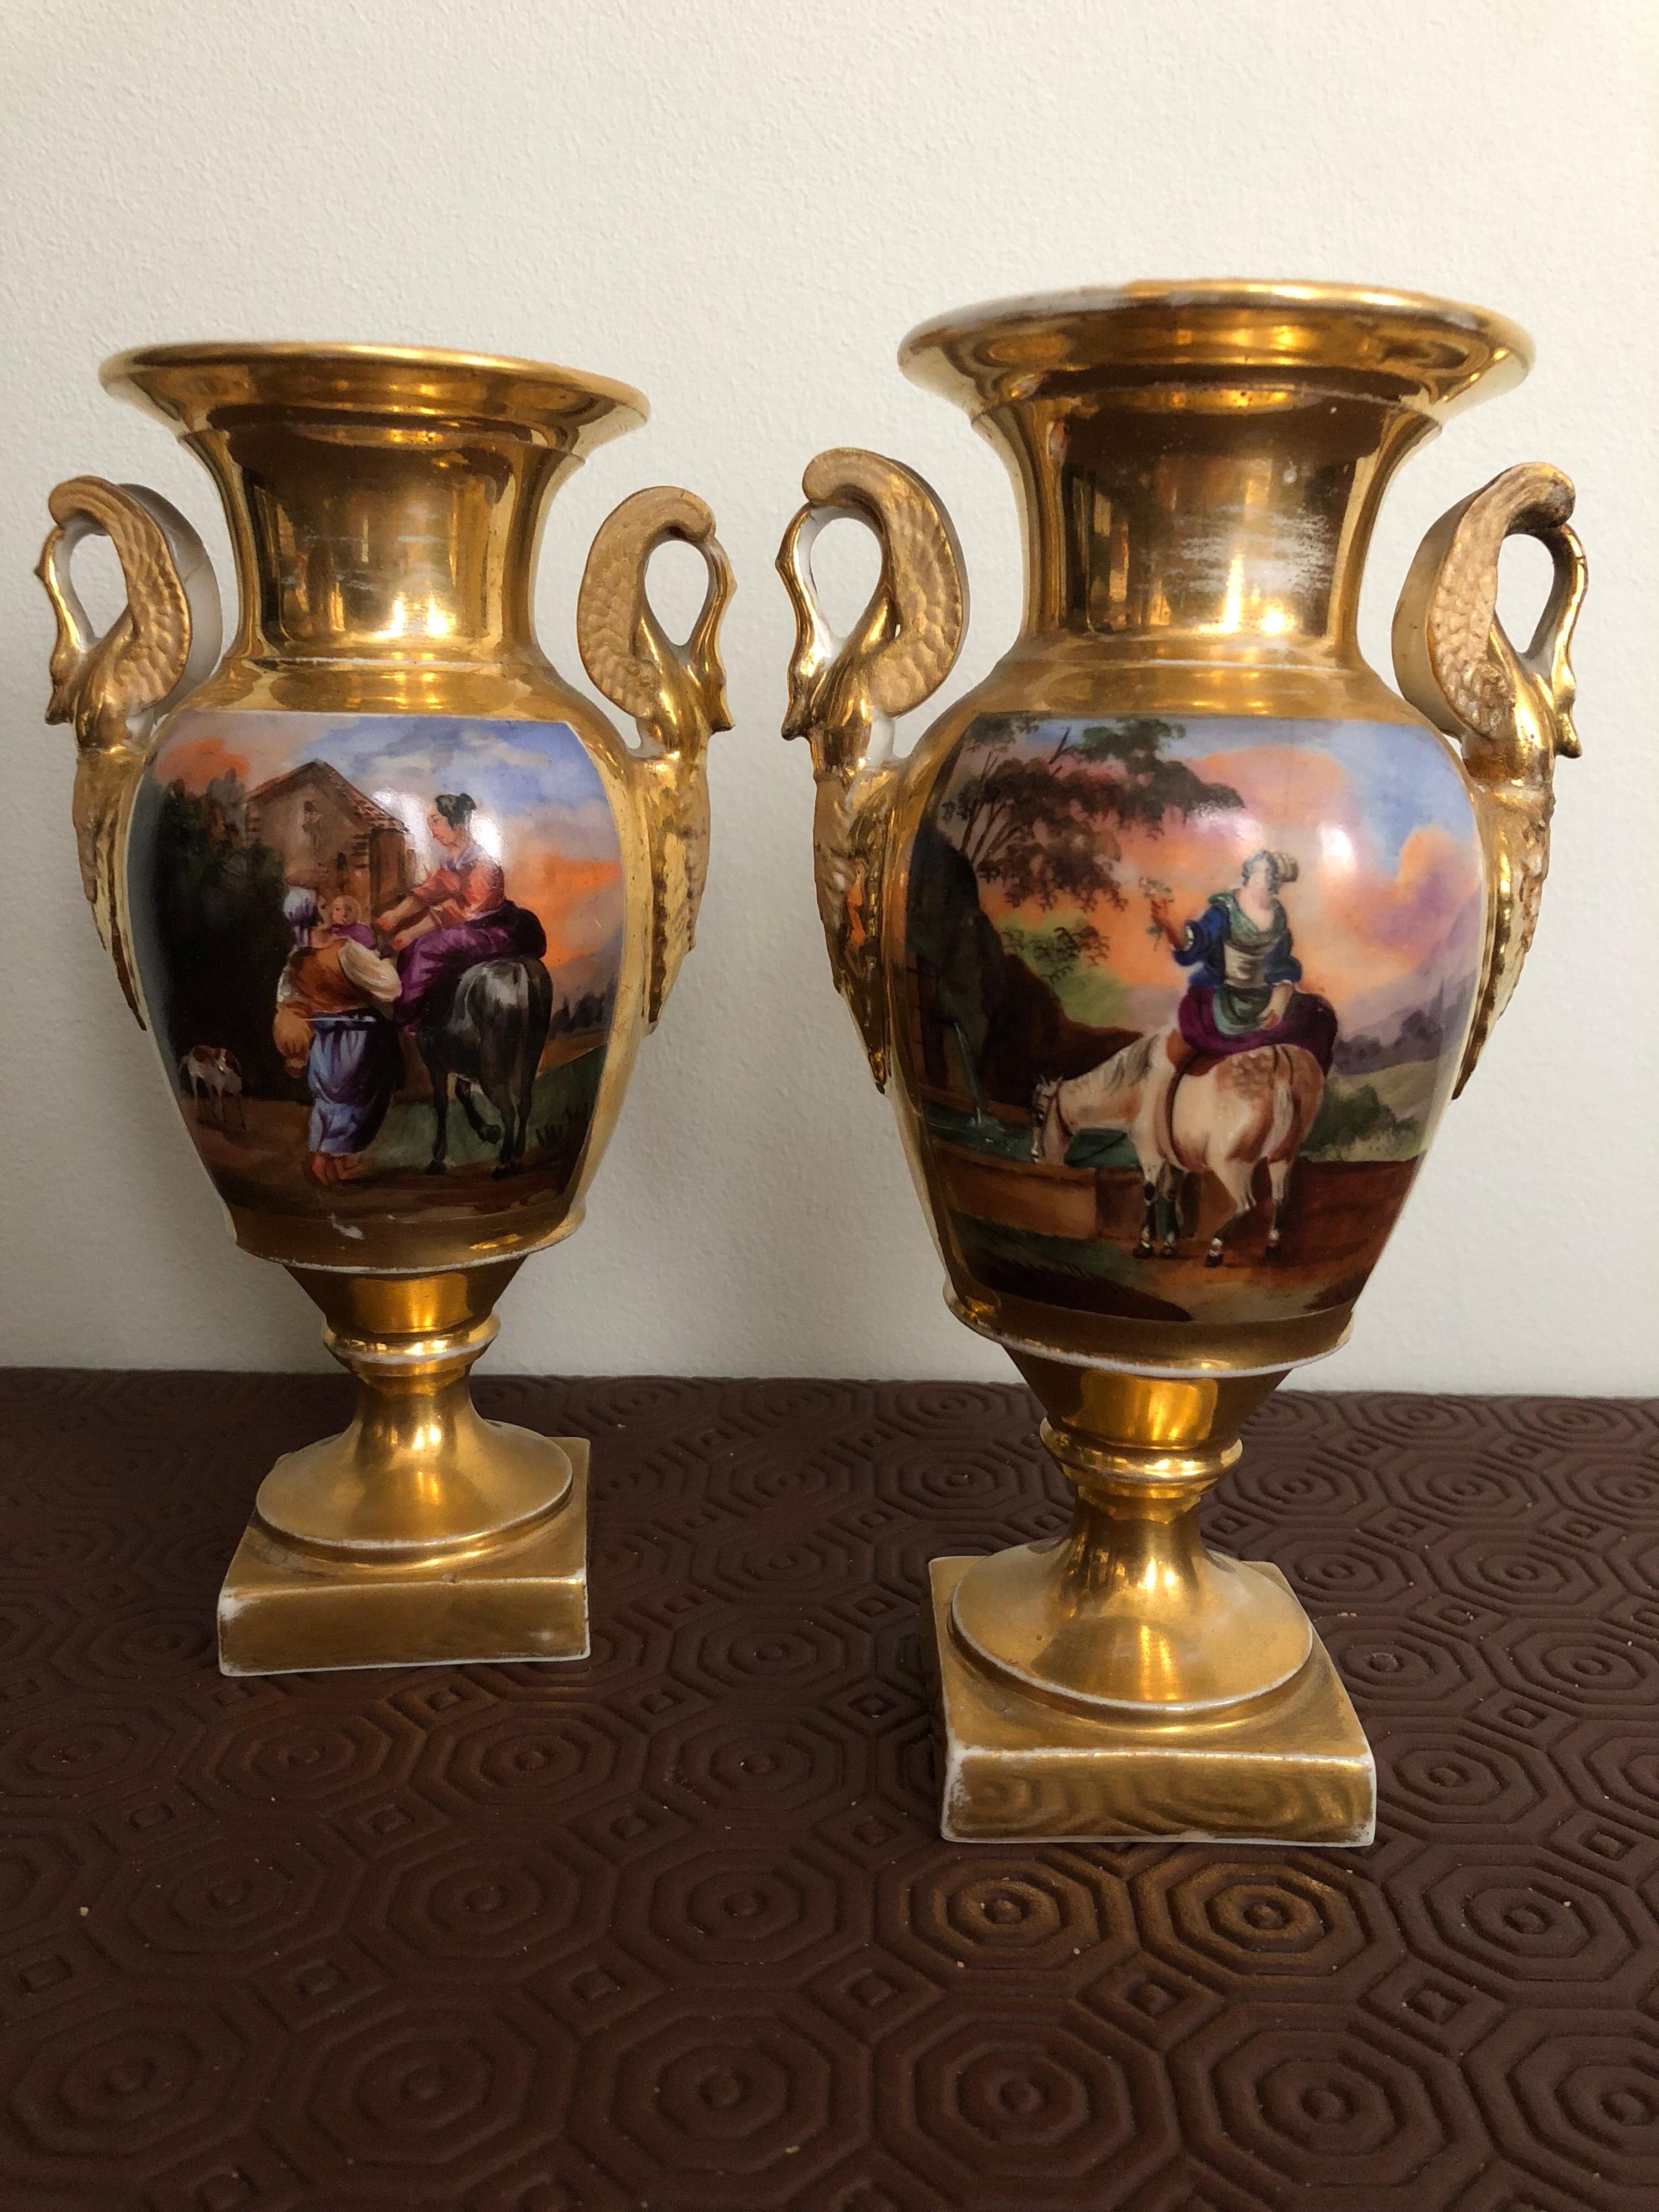 Hand-Painted 19th Century Baluster Shaped Hand Painted Porcelain Empire Pair of Vases